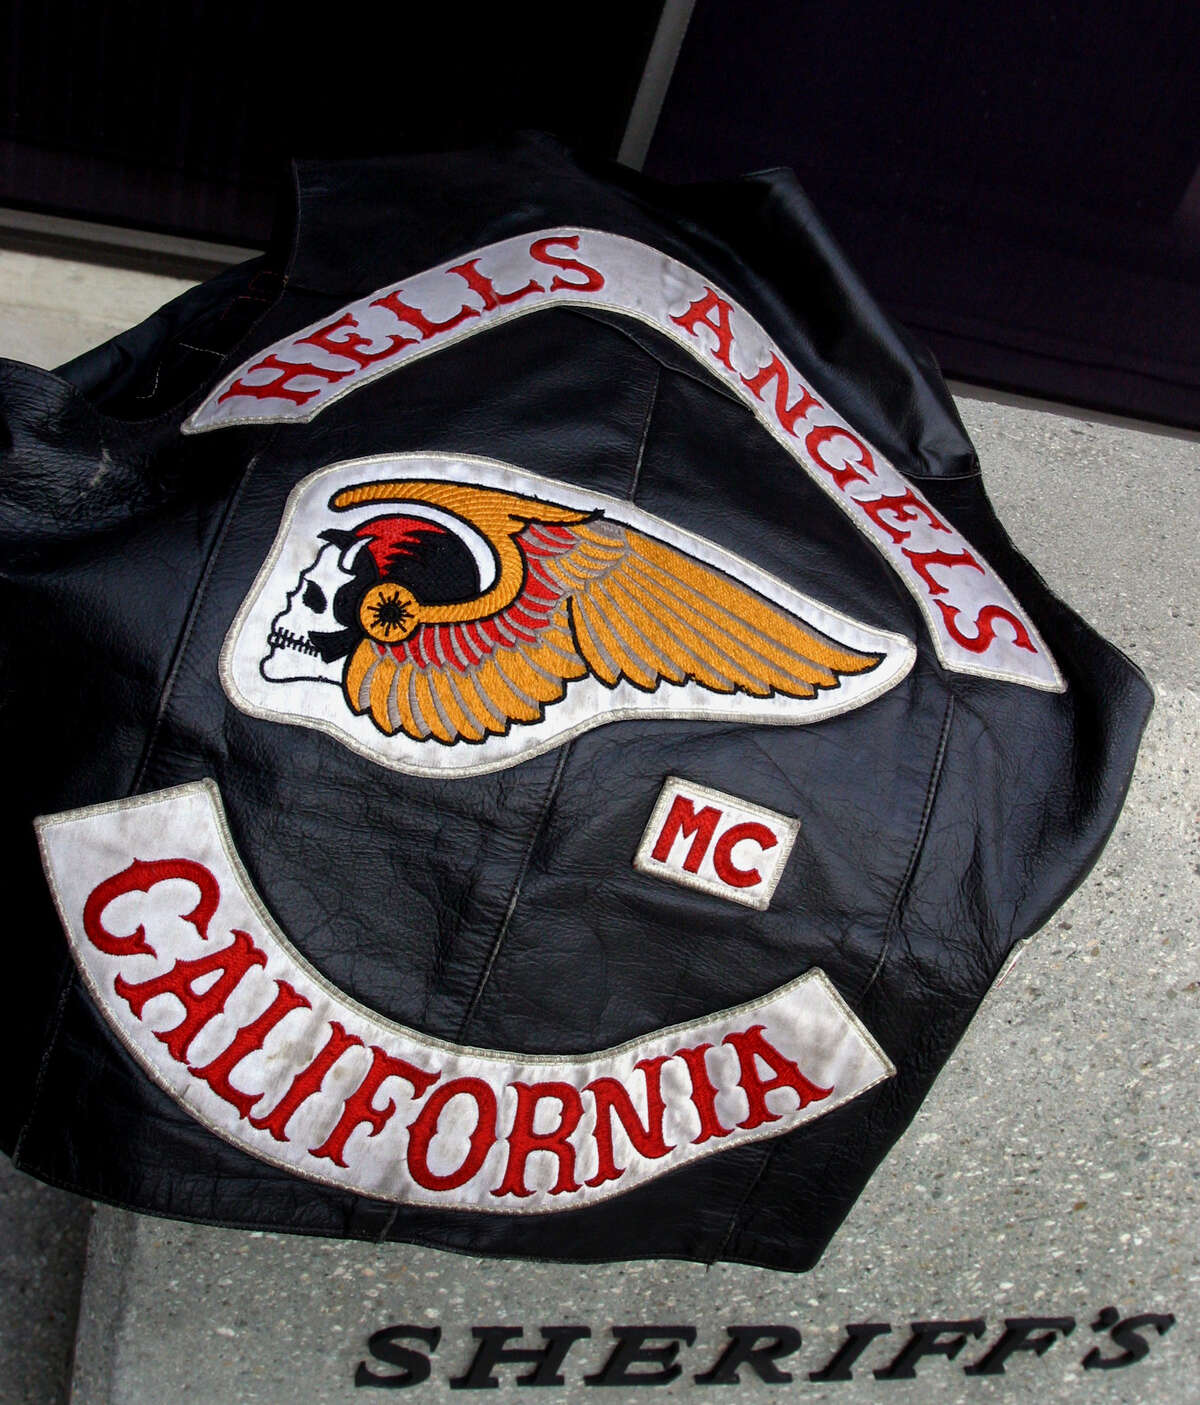 The anatomy of motorcycle club patches, explained